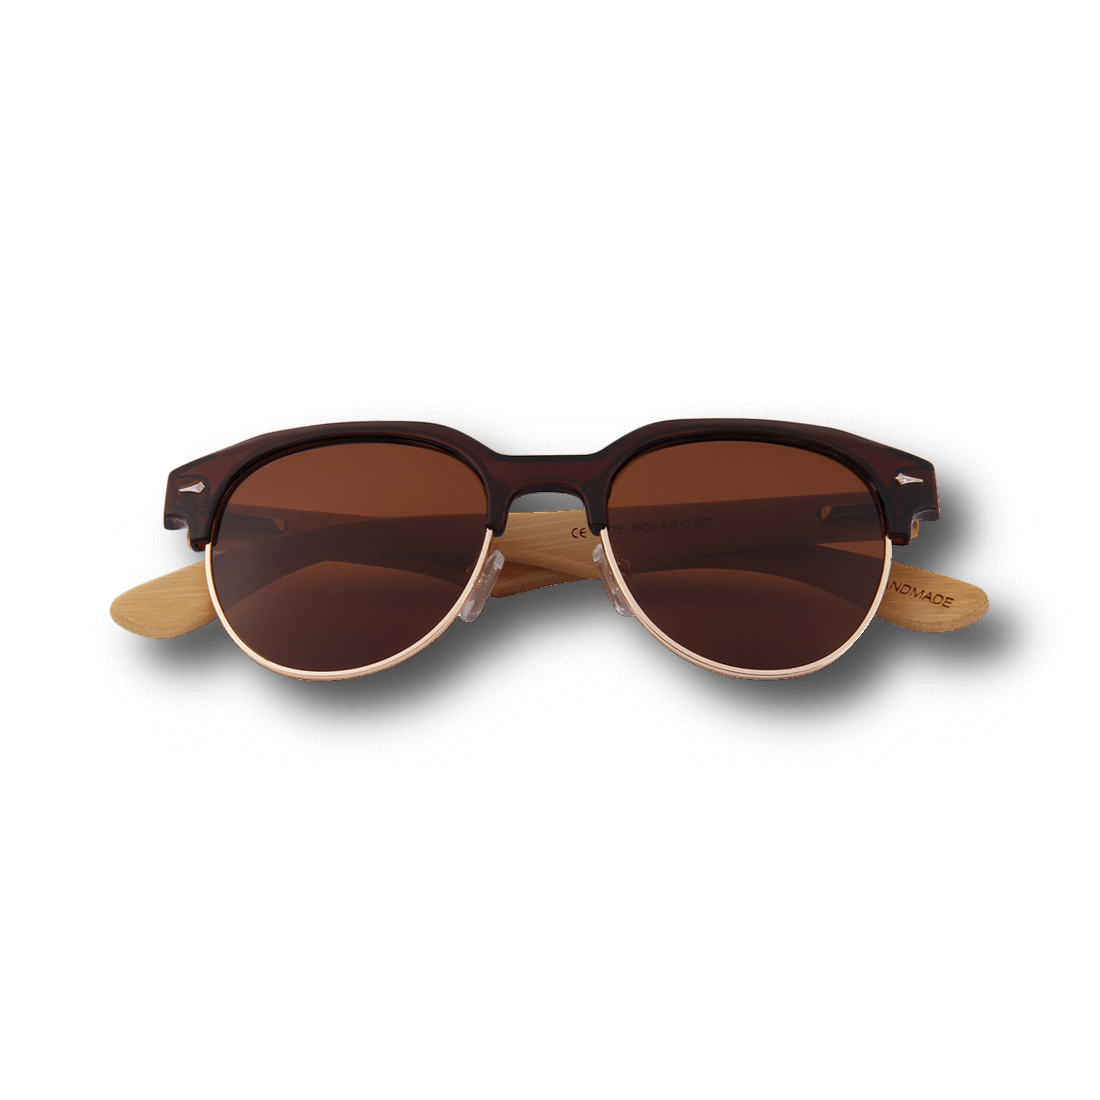 Real Bamboo Vintage Browline Style RetroShade Sunglasses by WUDN